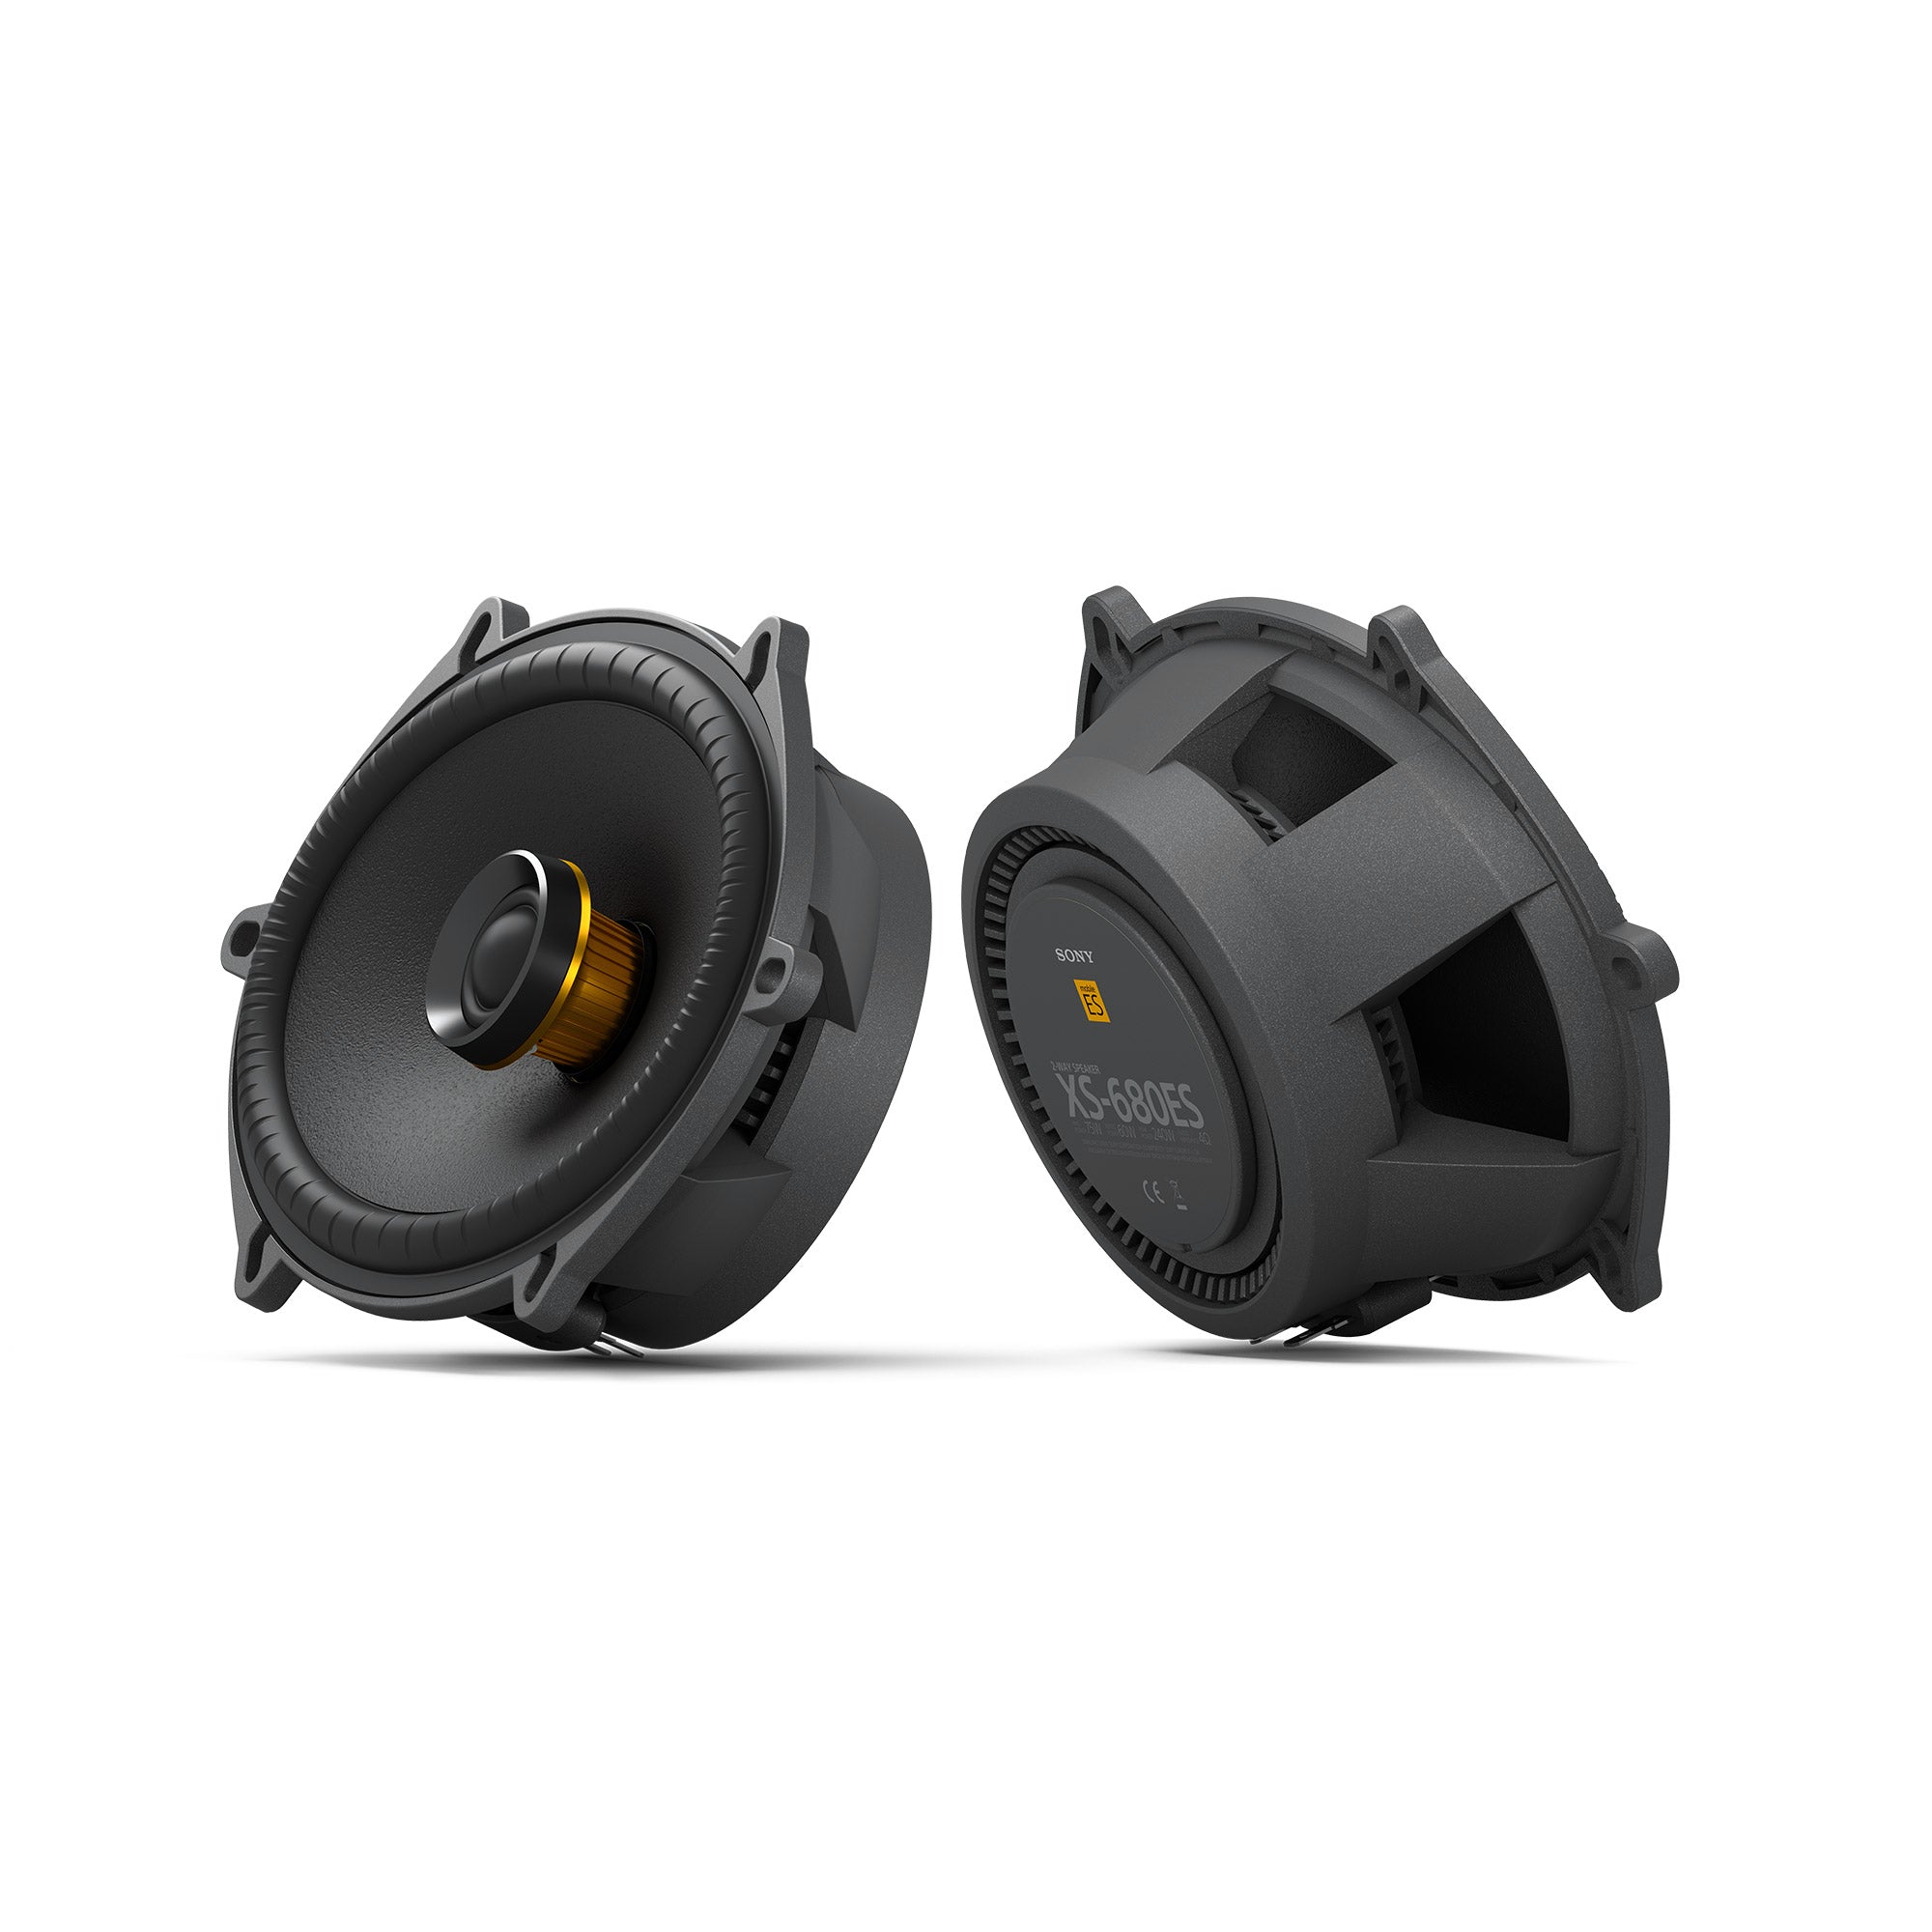 XS-680ES | 6 x 8 in (16 x 20 cm) Mobile ES™ Coaxial Two-way Speakers